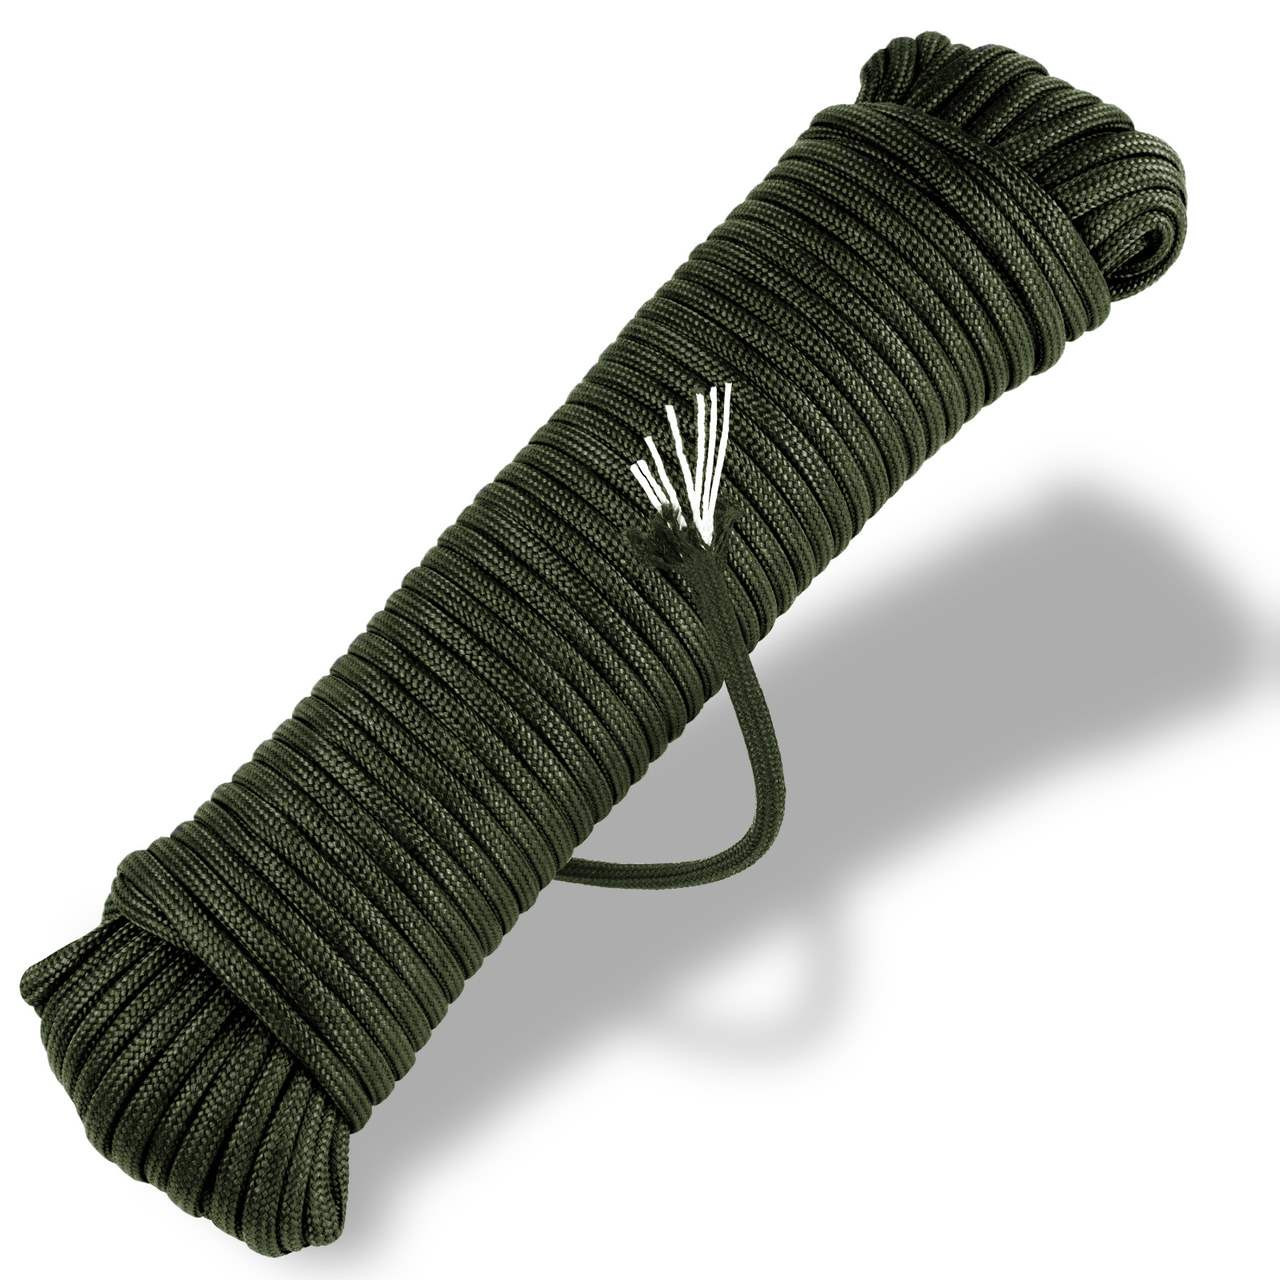 Olive Drab 550 7-Strand Commercial Grade Paracord